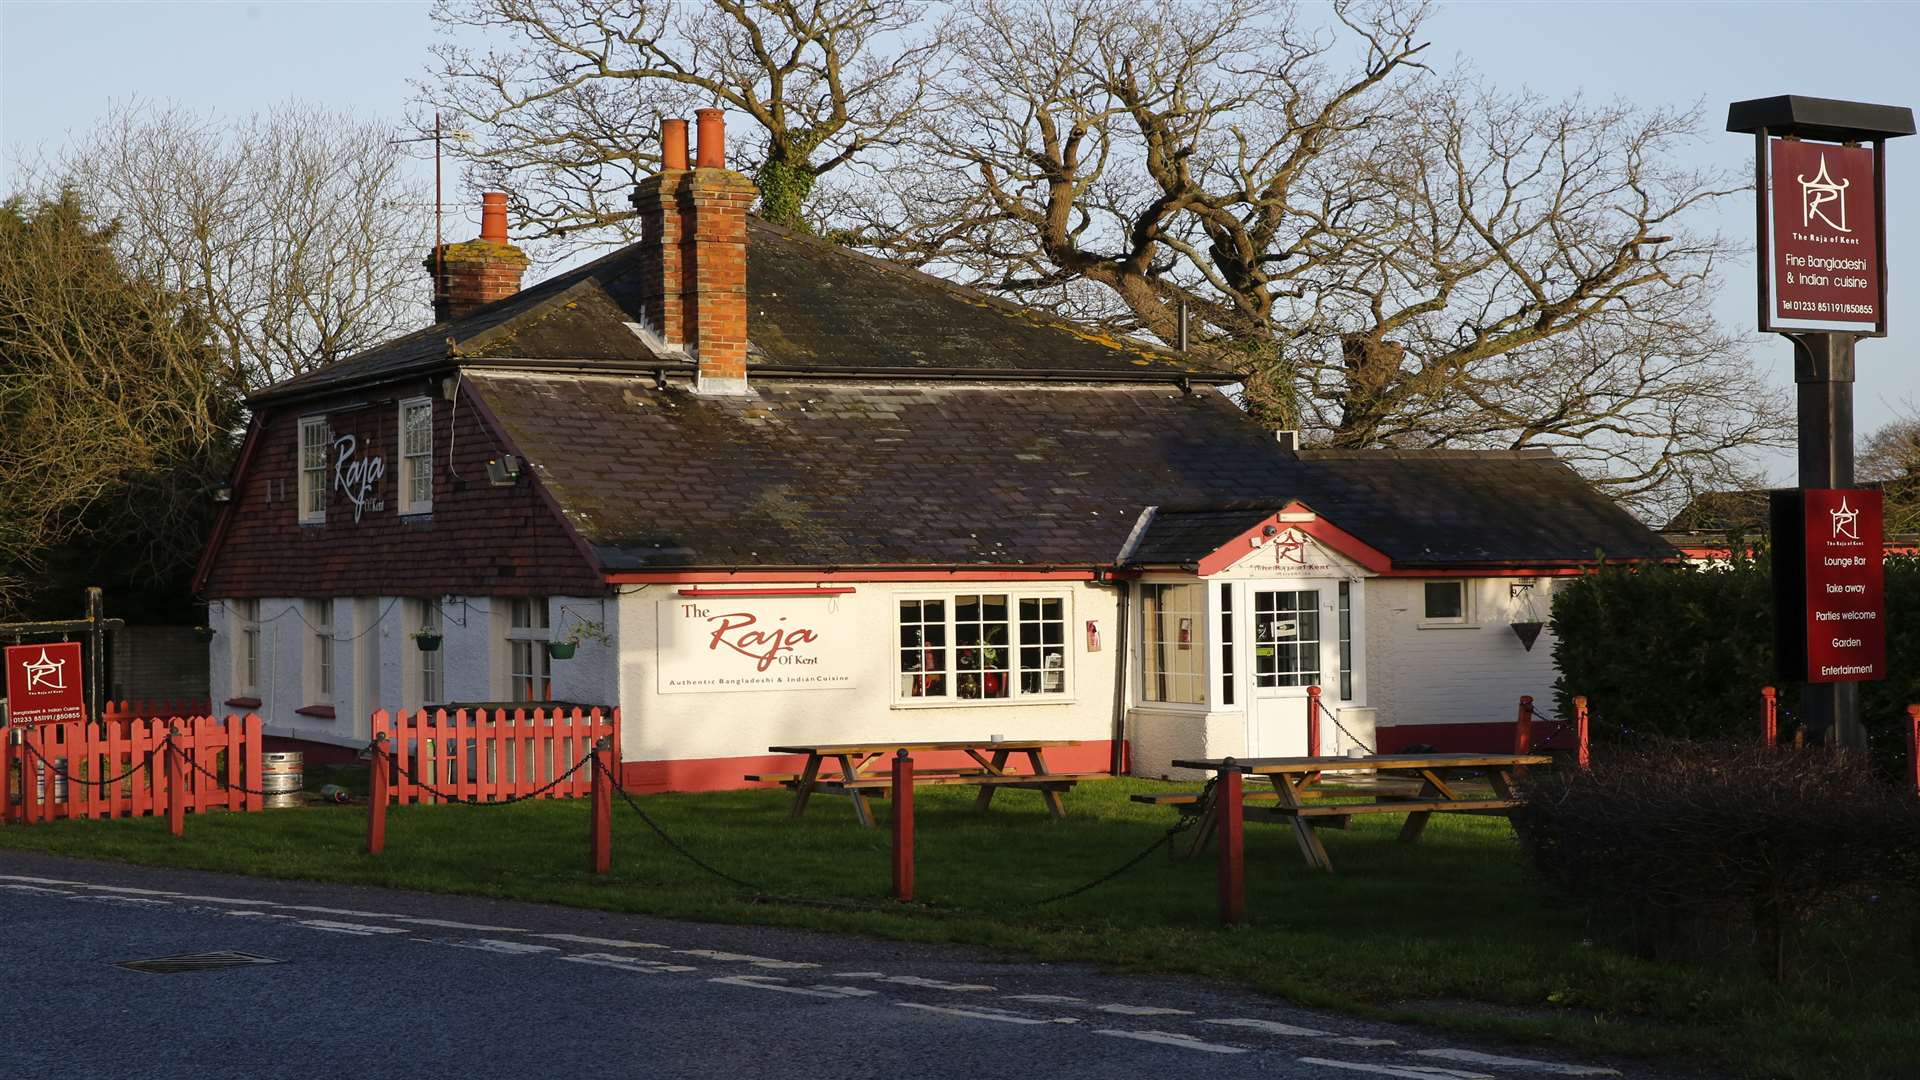 The restaurant at the centre of an immigration raid